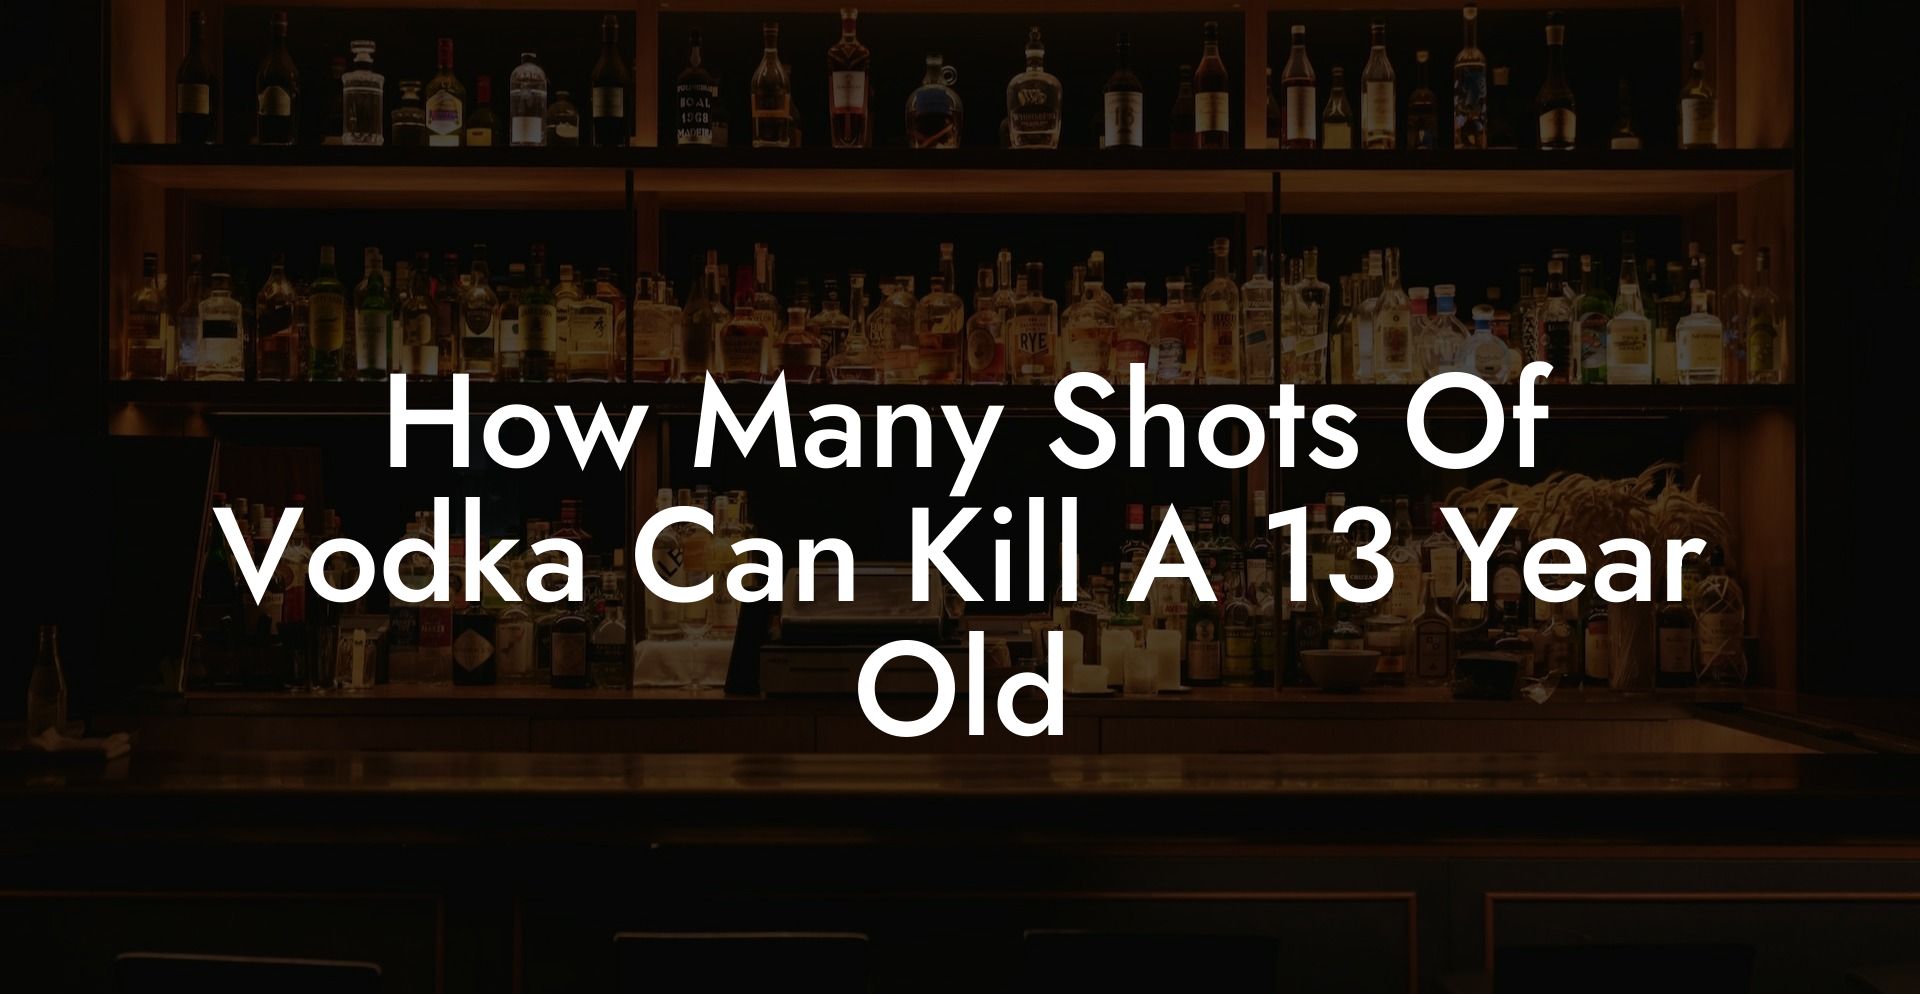 How Many Shots Of Vodka Can Kill A 13 Year Old